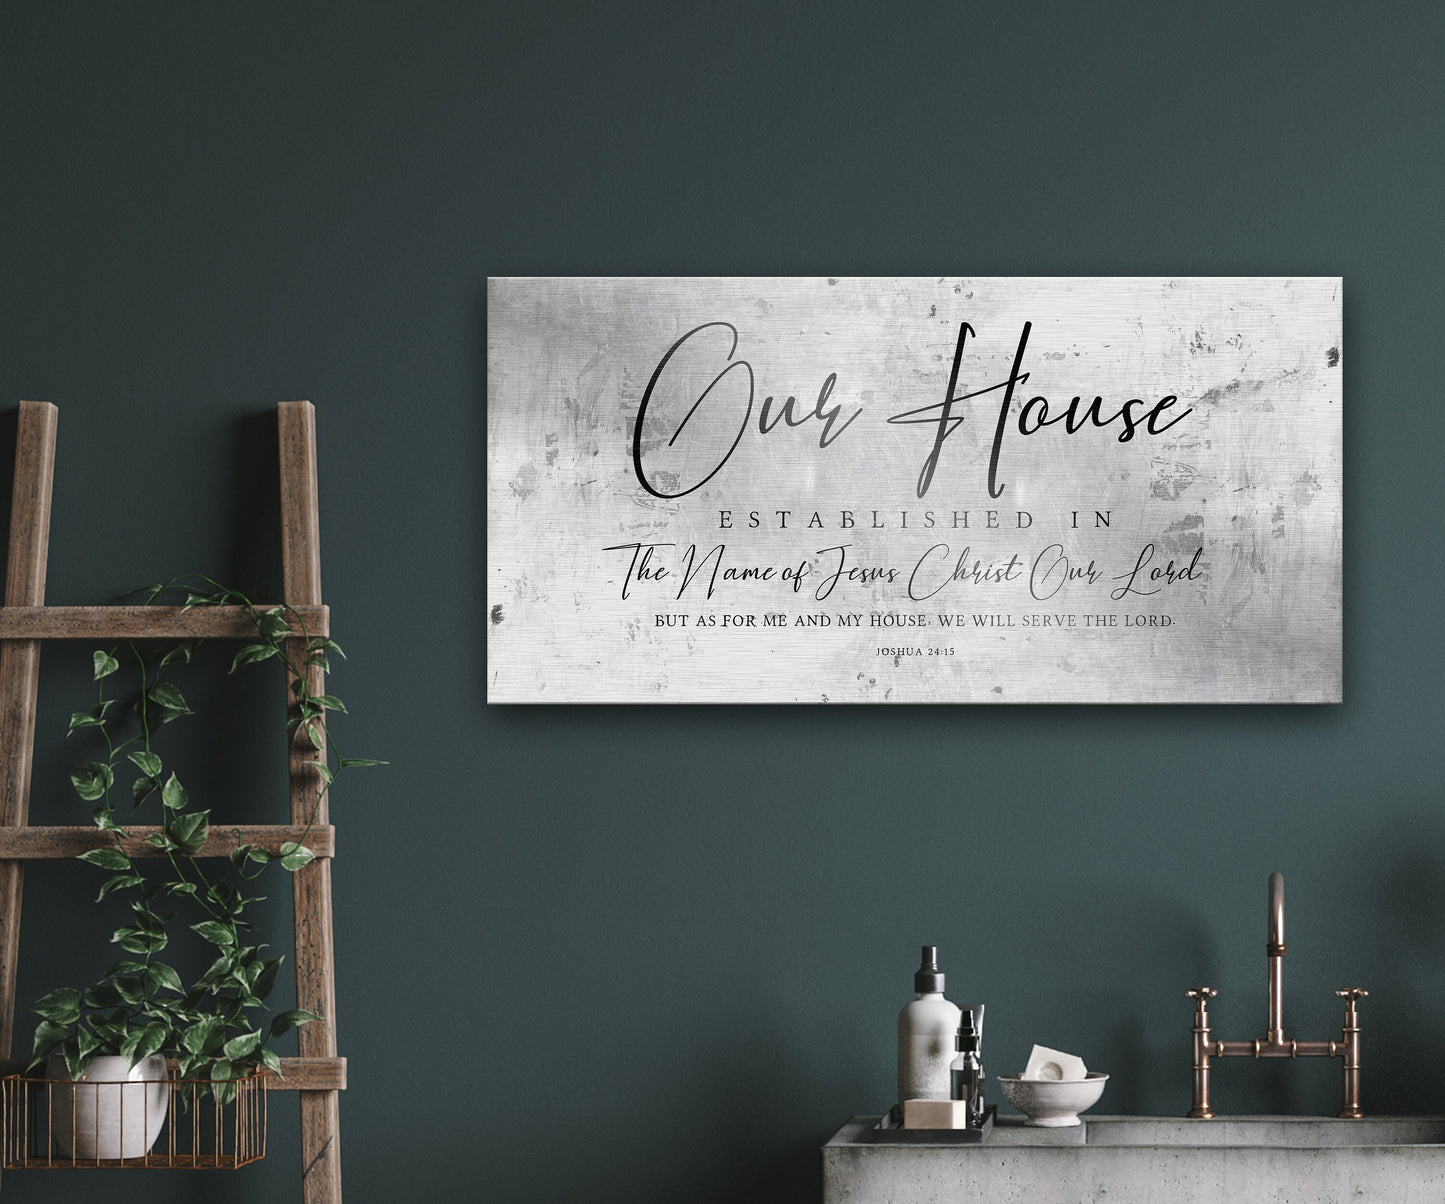 Faithful Farmhouse Wall Decor, "As for me and my house" Sign, Josh 24:15 Family Sign, "We will serve the Lord" quote sign, Anniversary gift